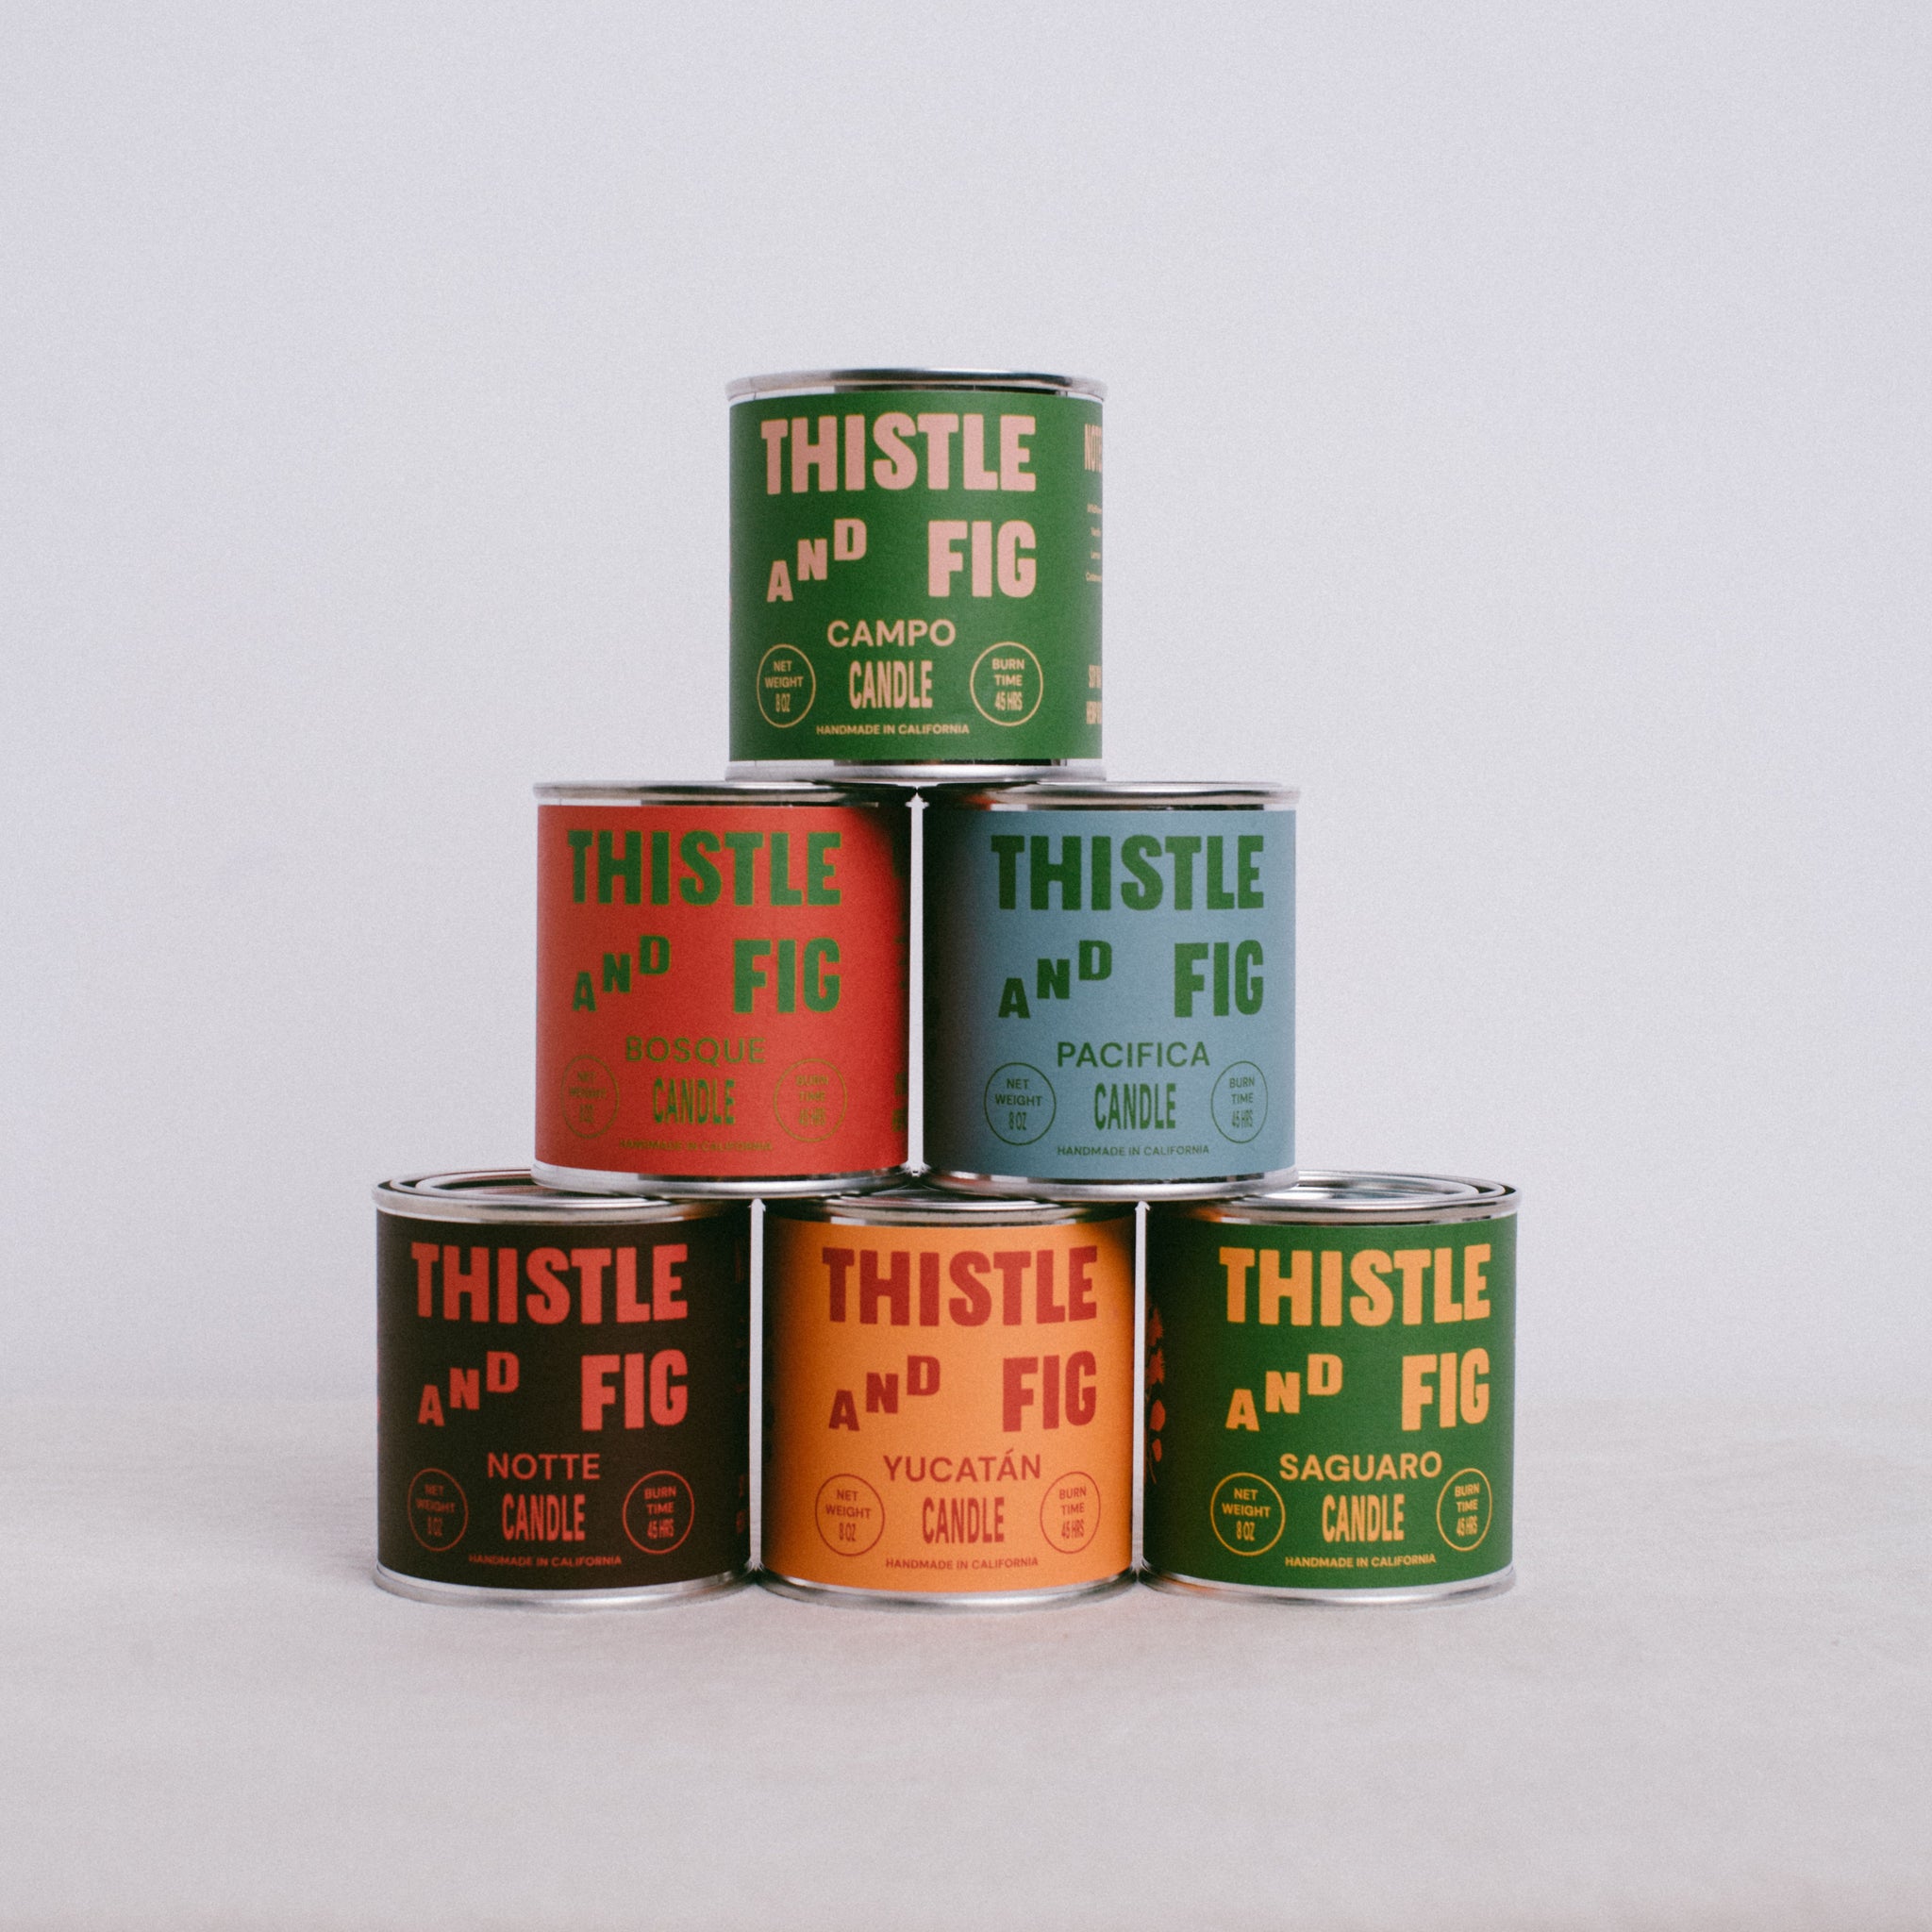 BOSQUE CANDLE || THISTLE & FIG